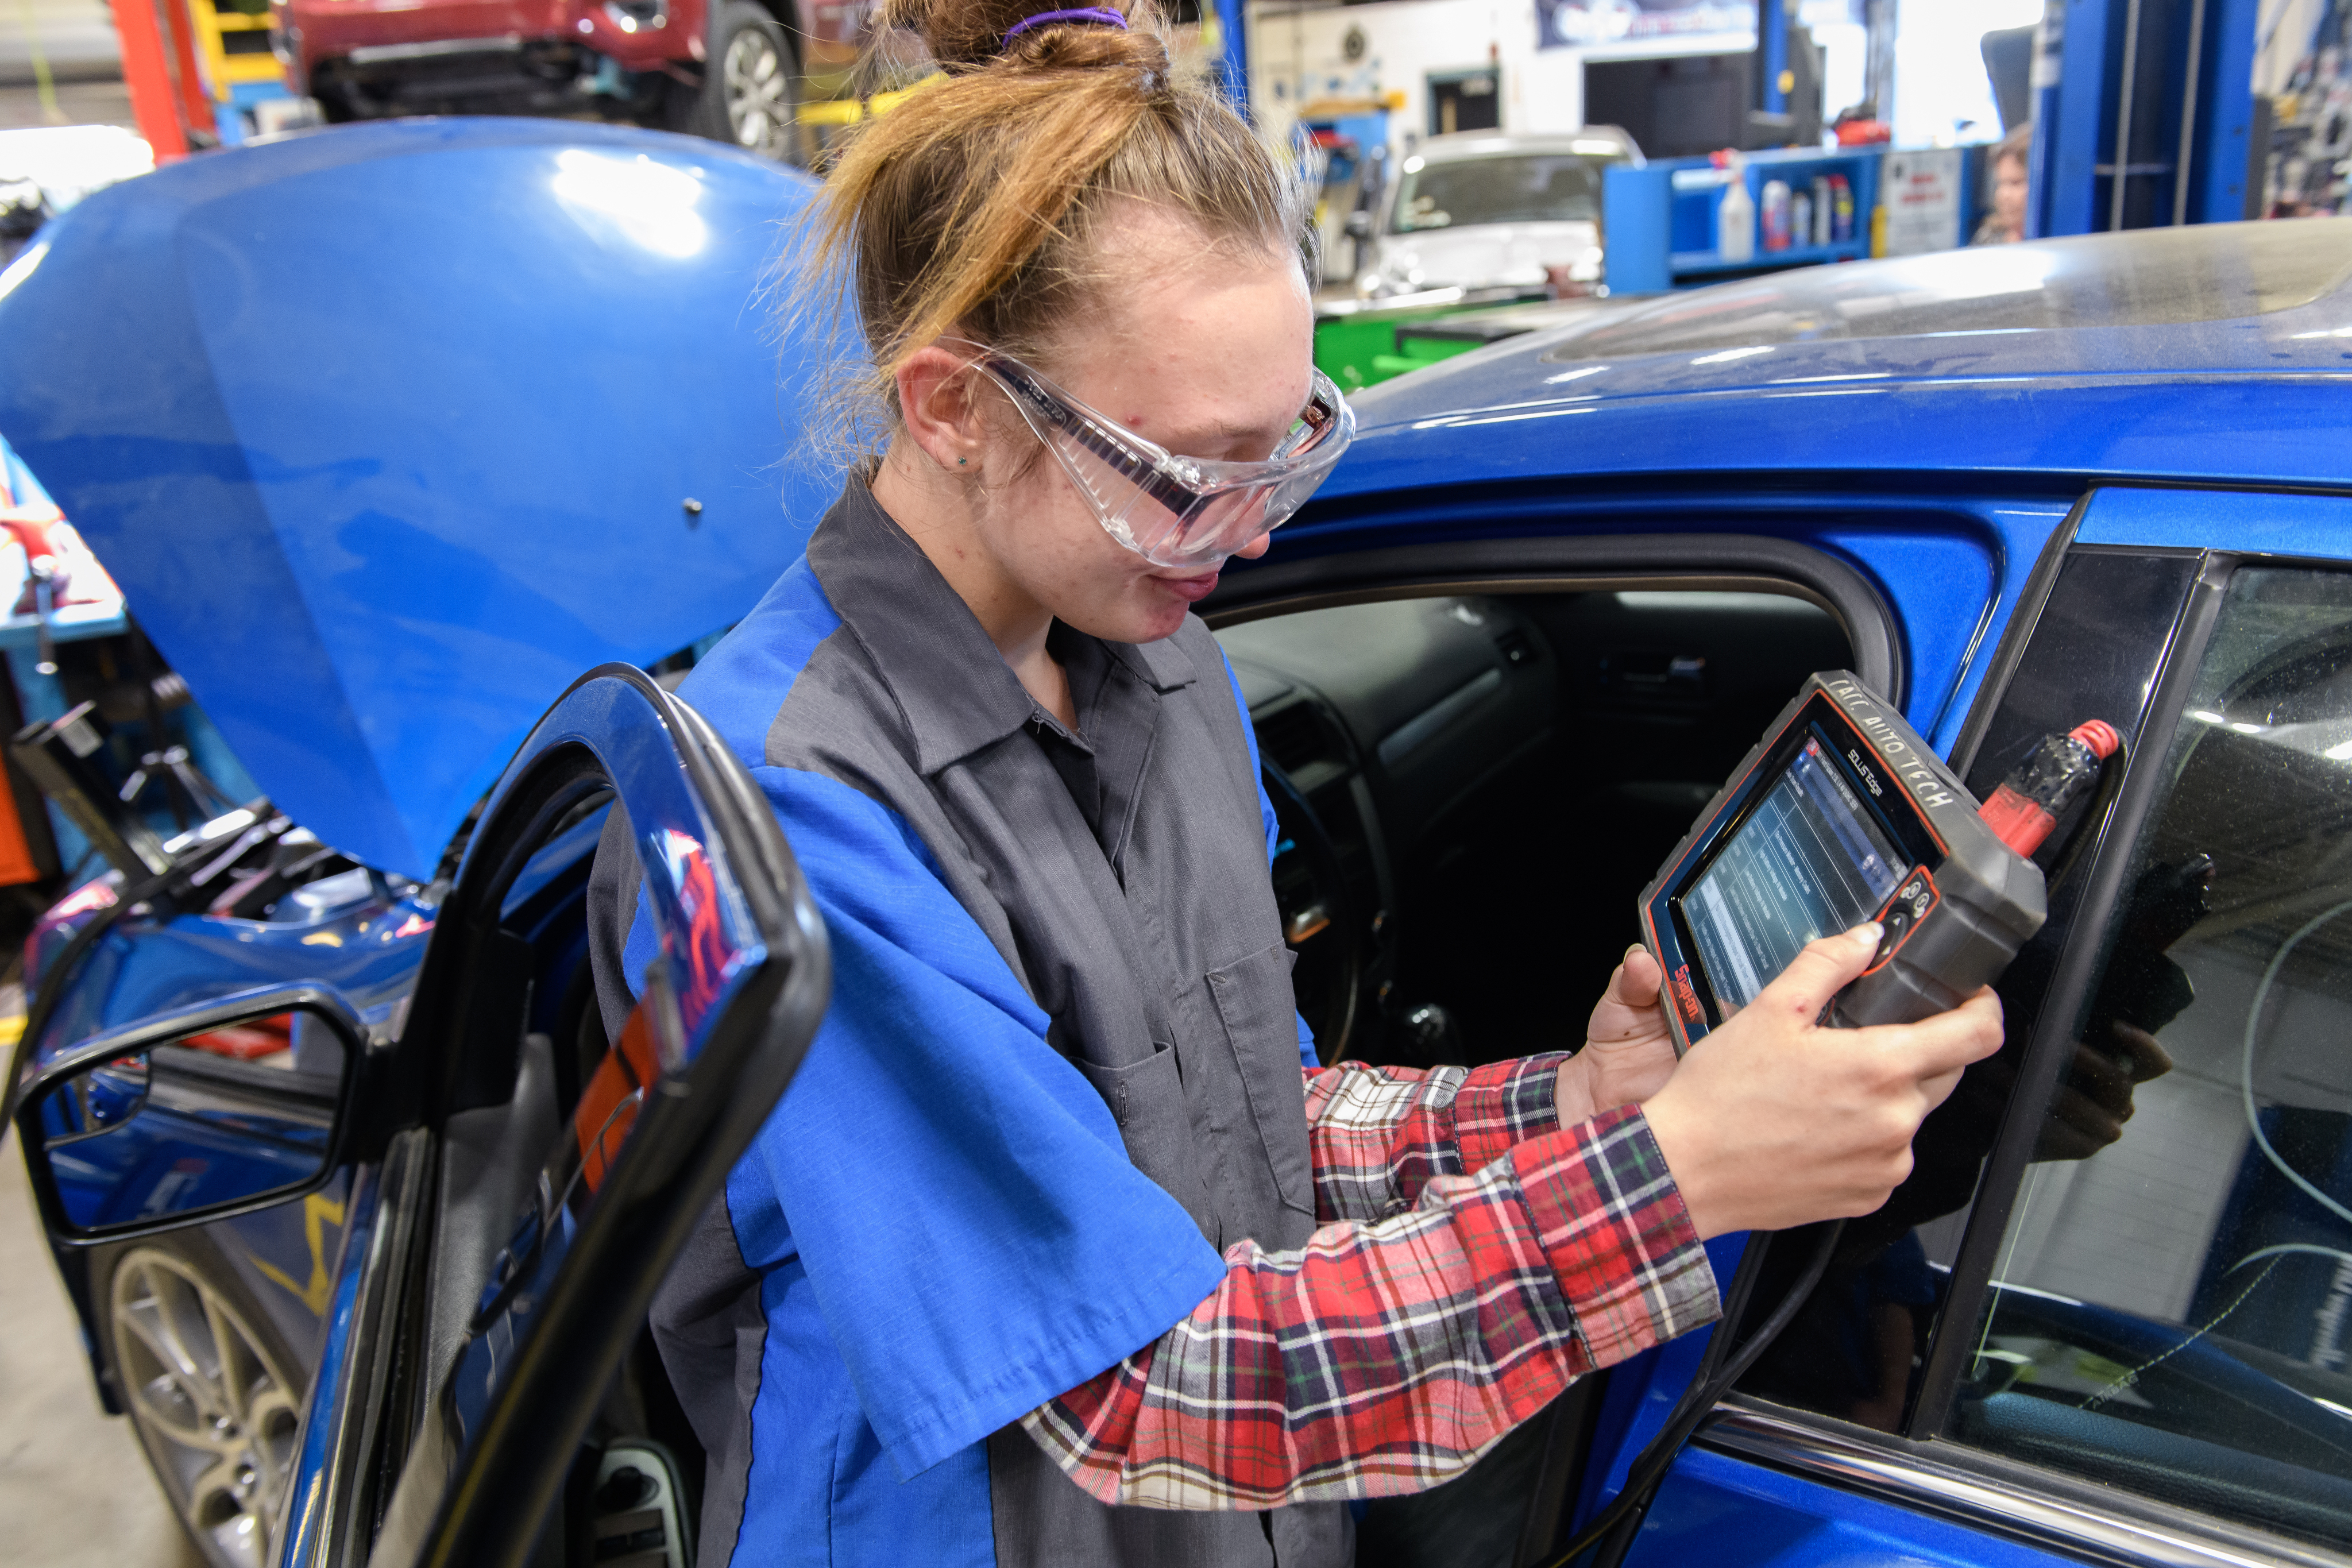 Automotive Technology student holds a computer devise to determine what is wrong with the vehicle.